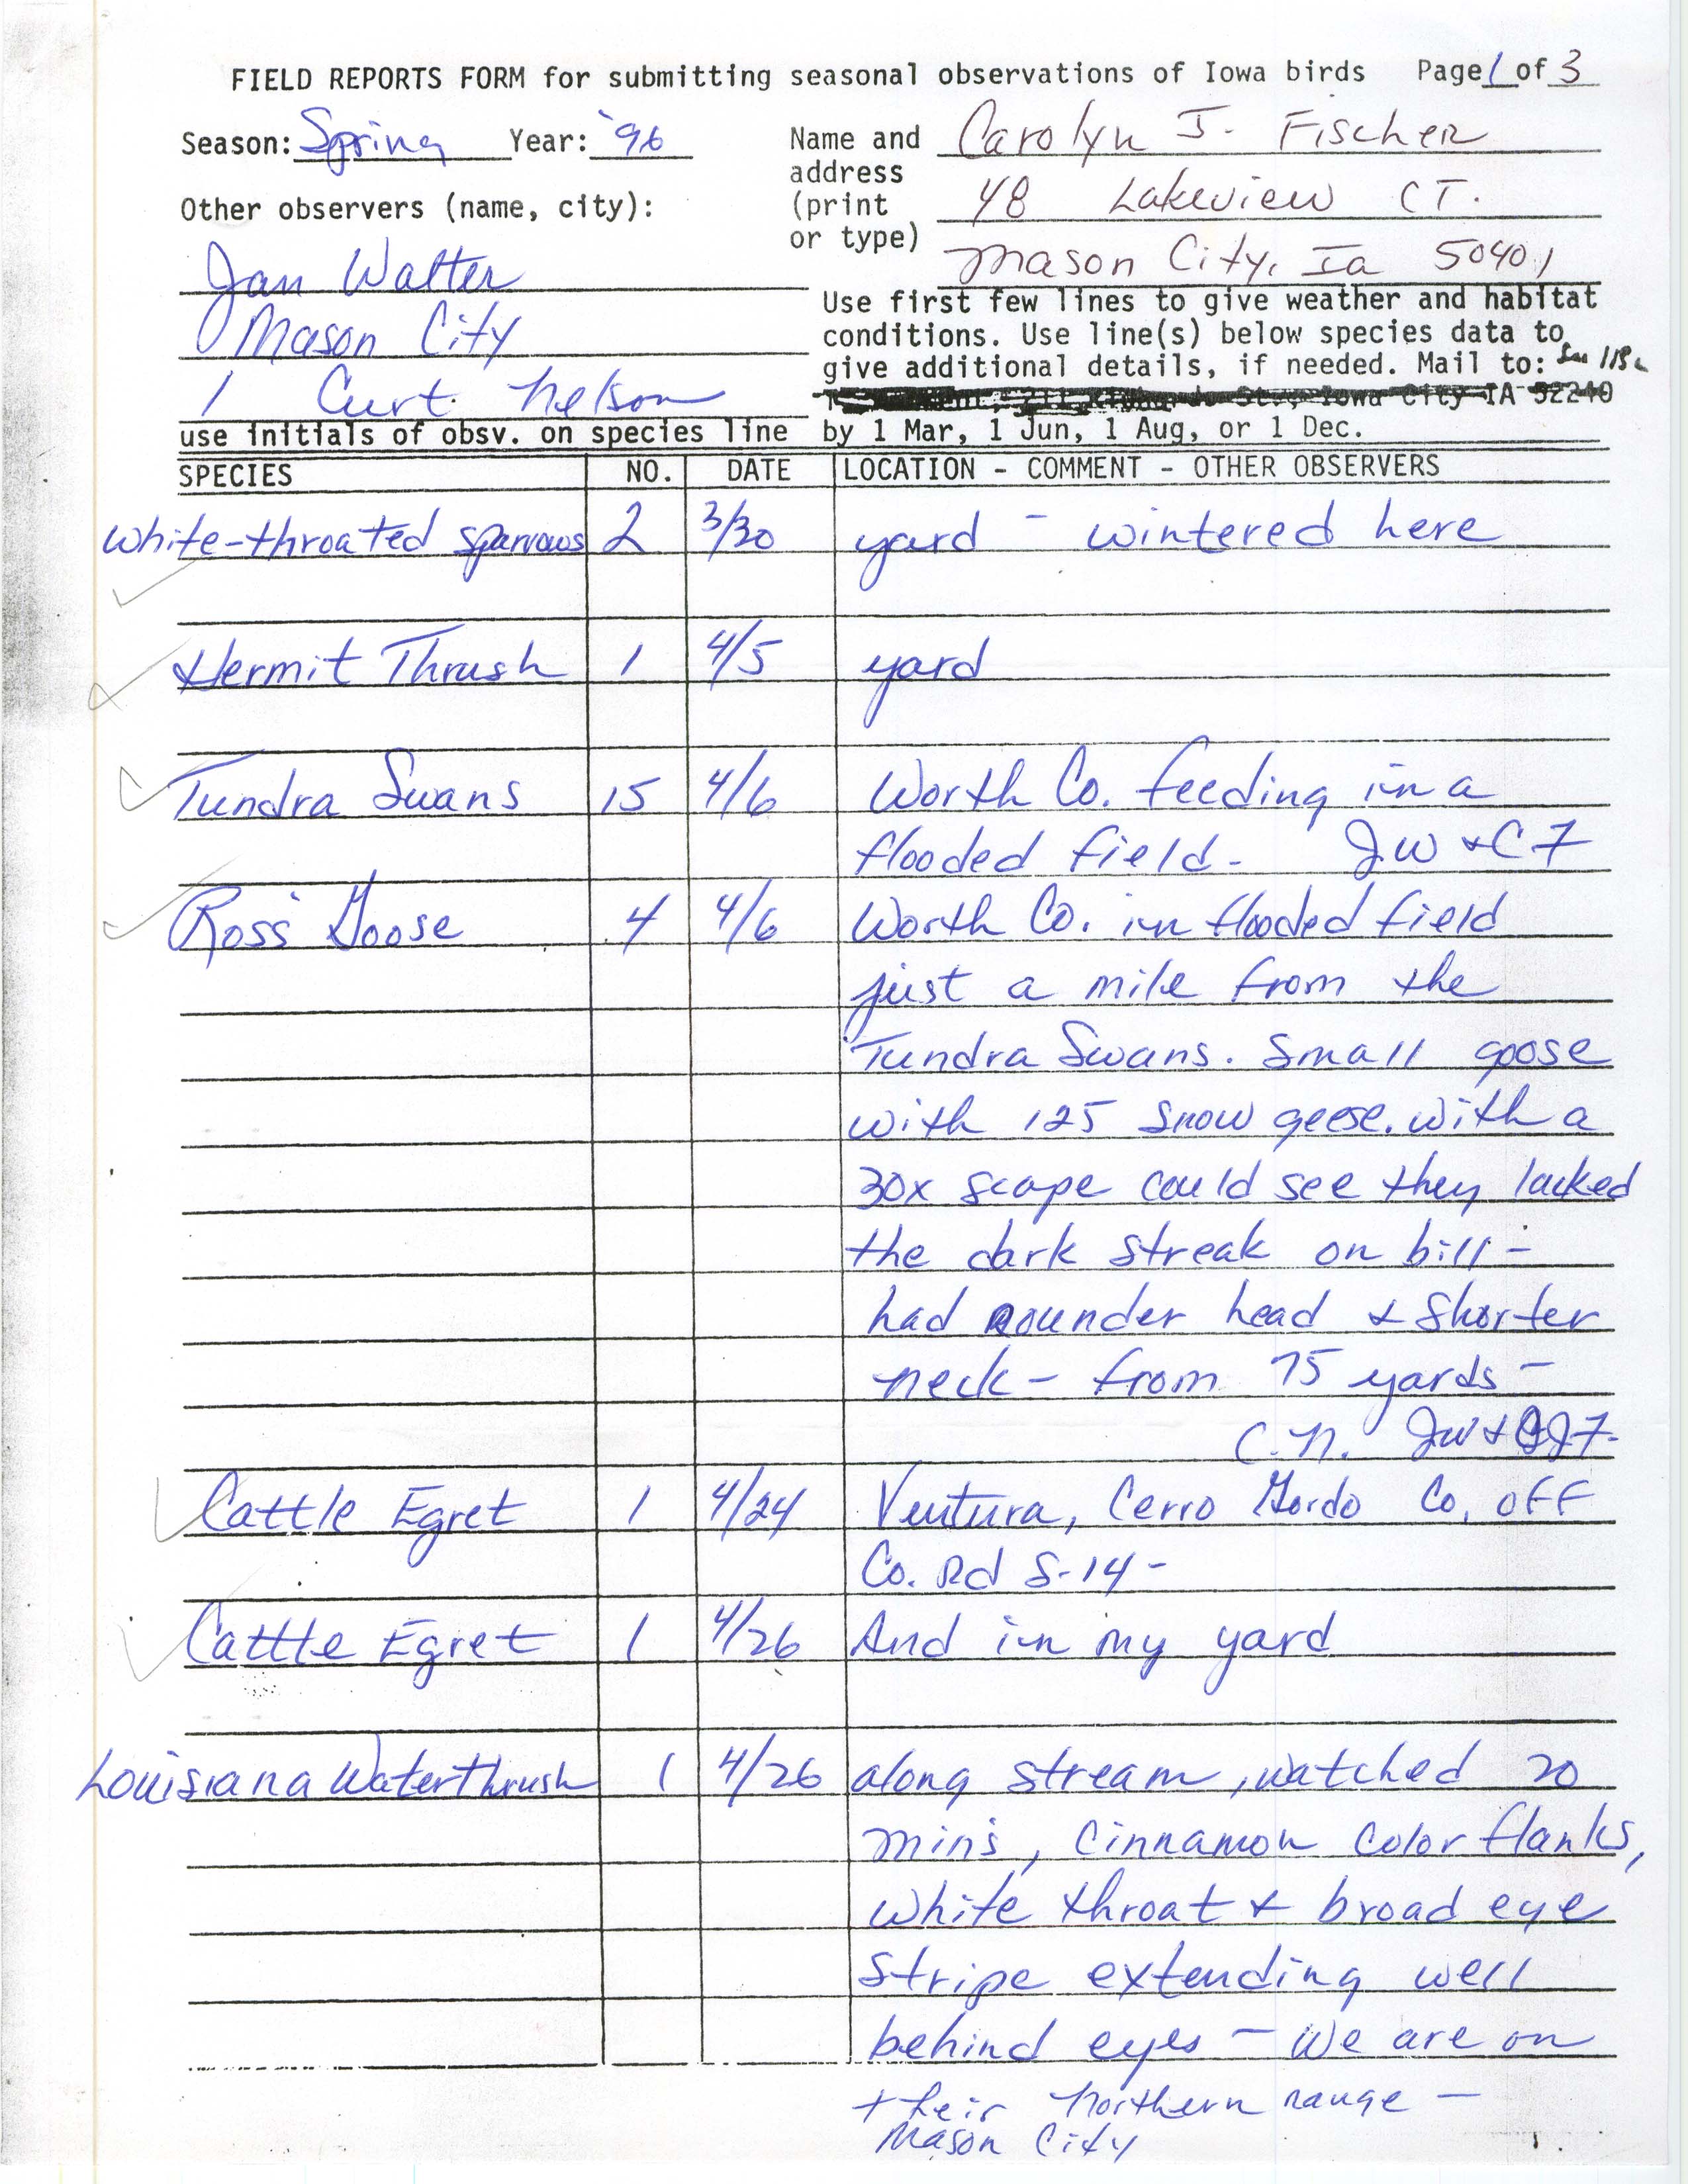 Field reports form for submitting seasonal observations of Iowa birds, Carolyn J. Fischer, spring 1996